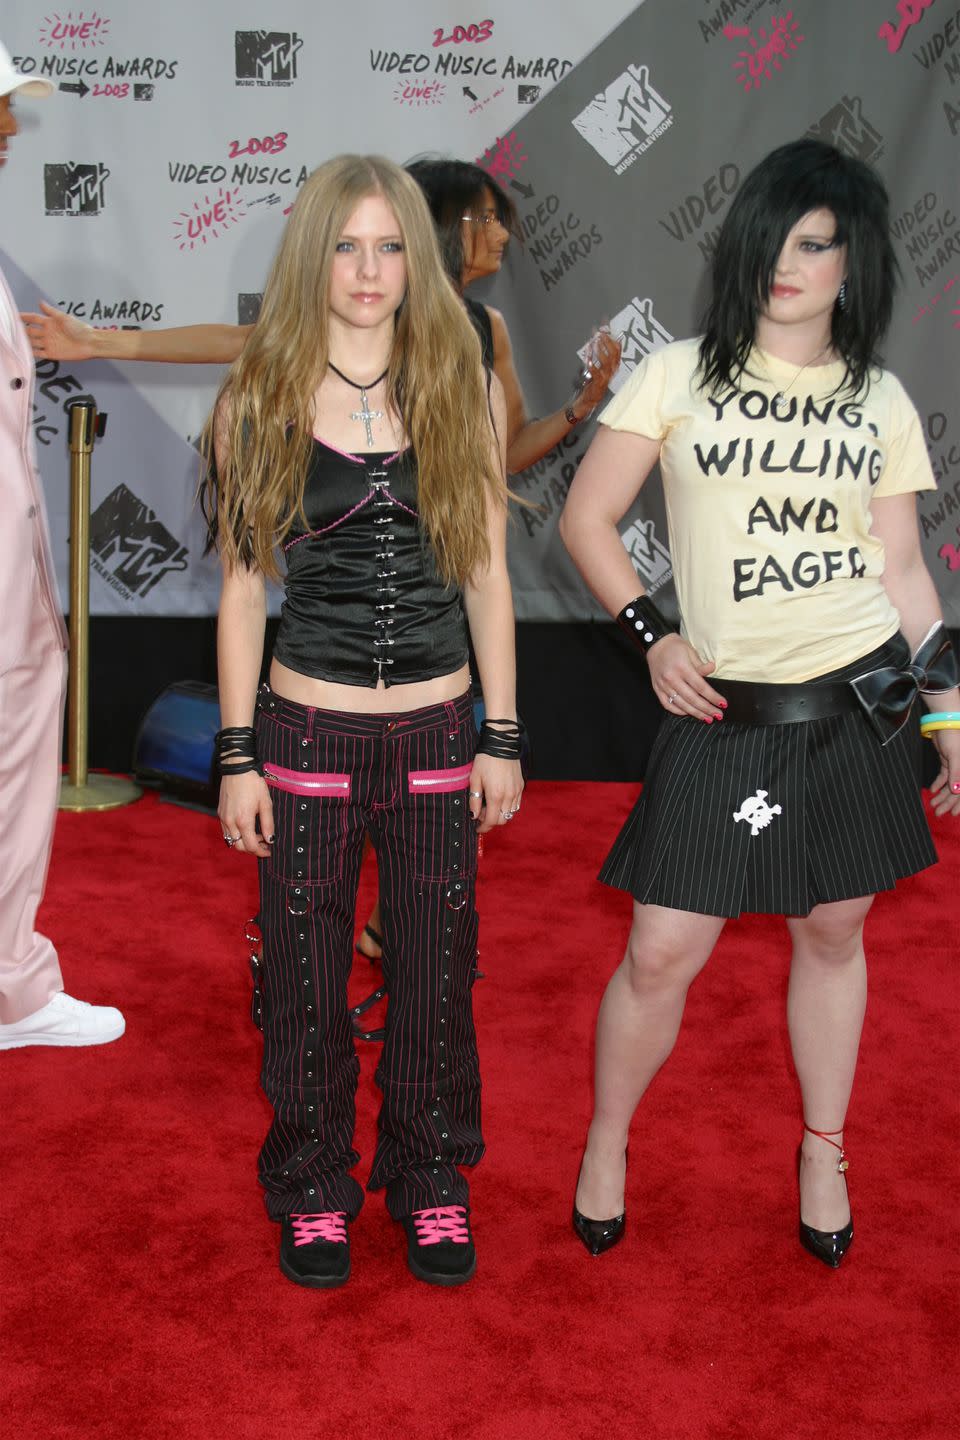 The 50 Craziest, Most Cringe-Worthy Outfits Celebrities Wore In The Early 2000s